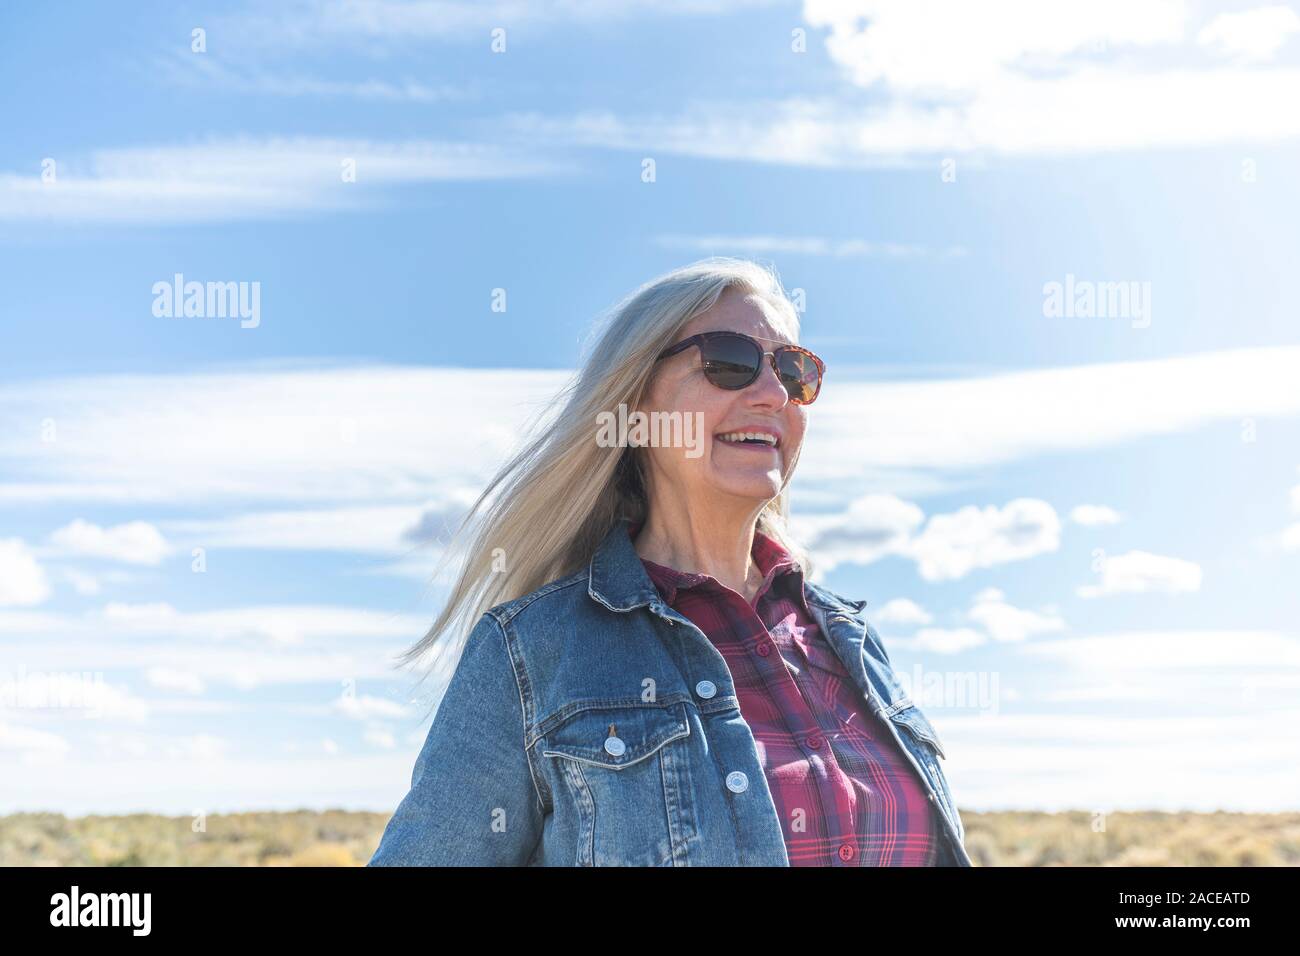 Woman wearing sunglasses against cloud Stock Photo